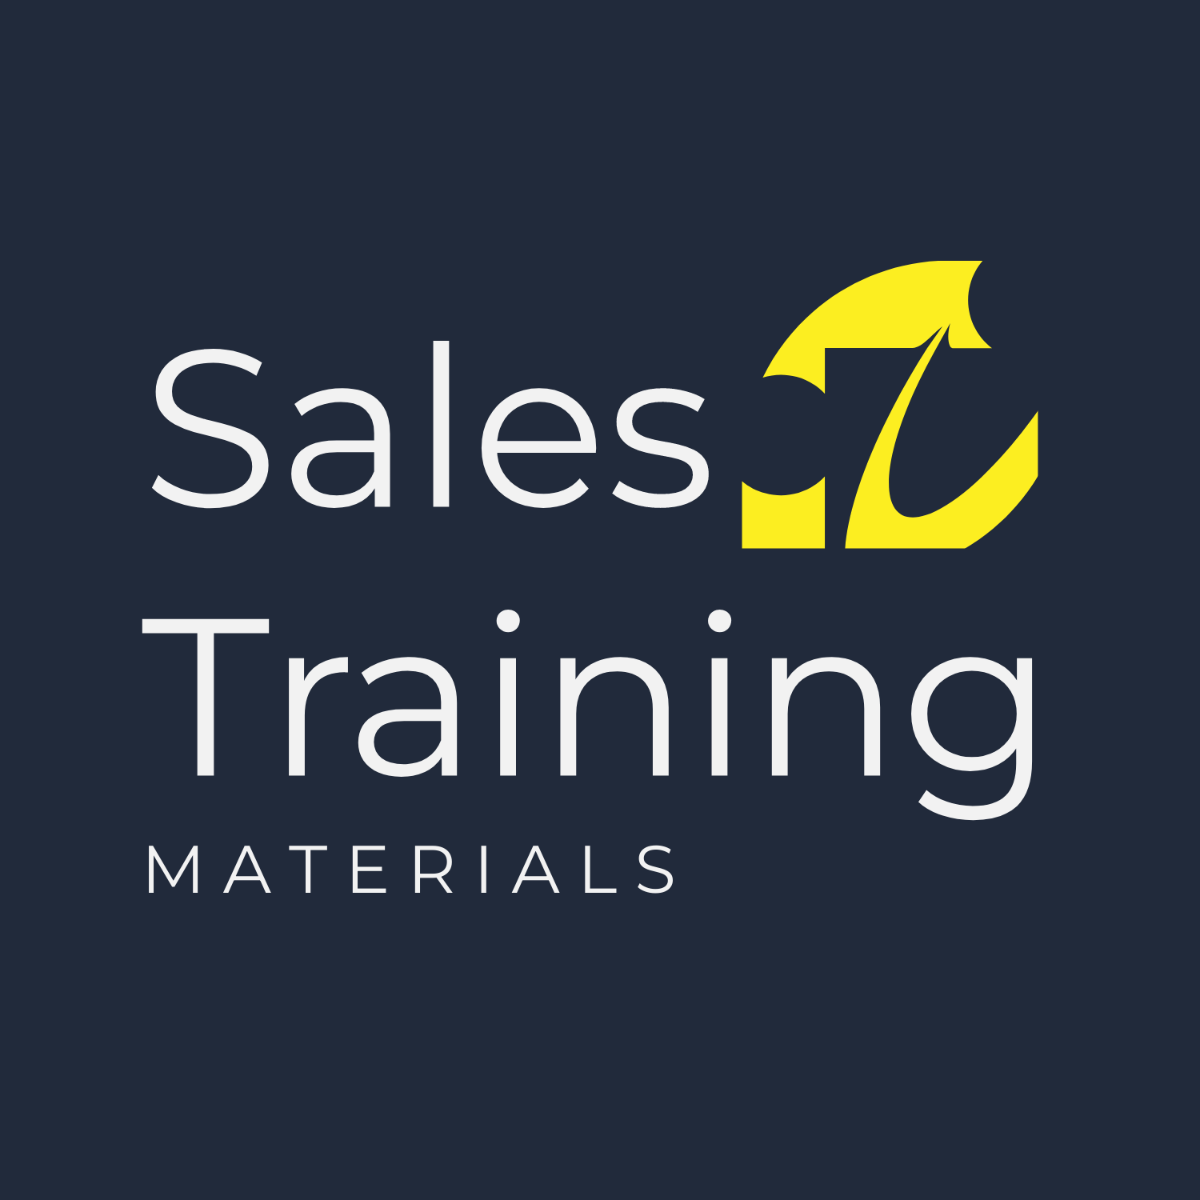 Free Sales Training Materials Logo Template